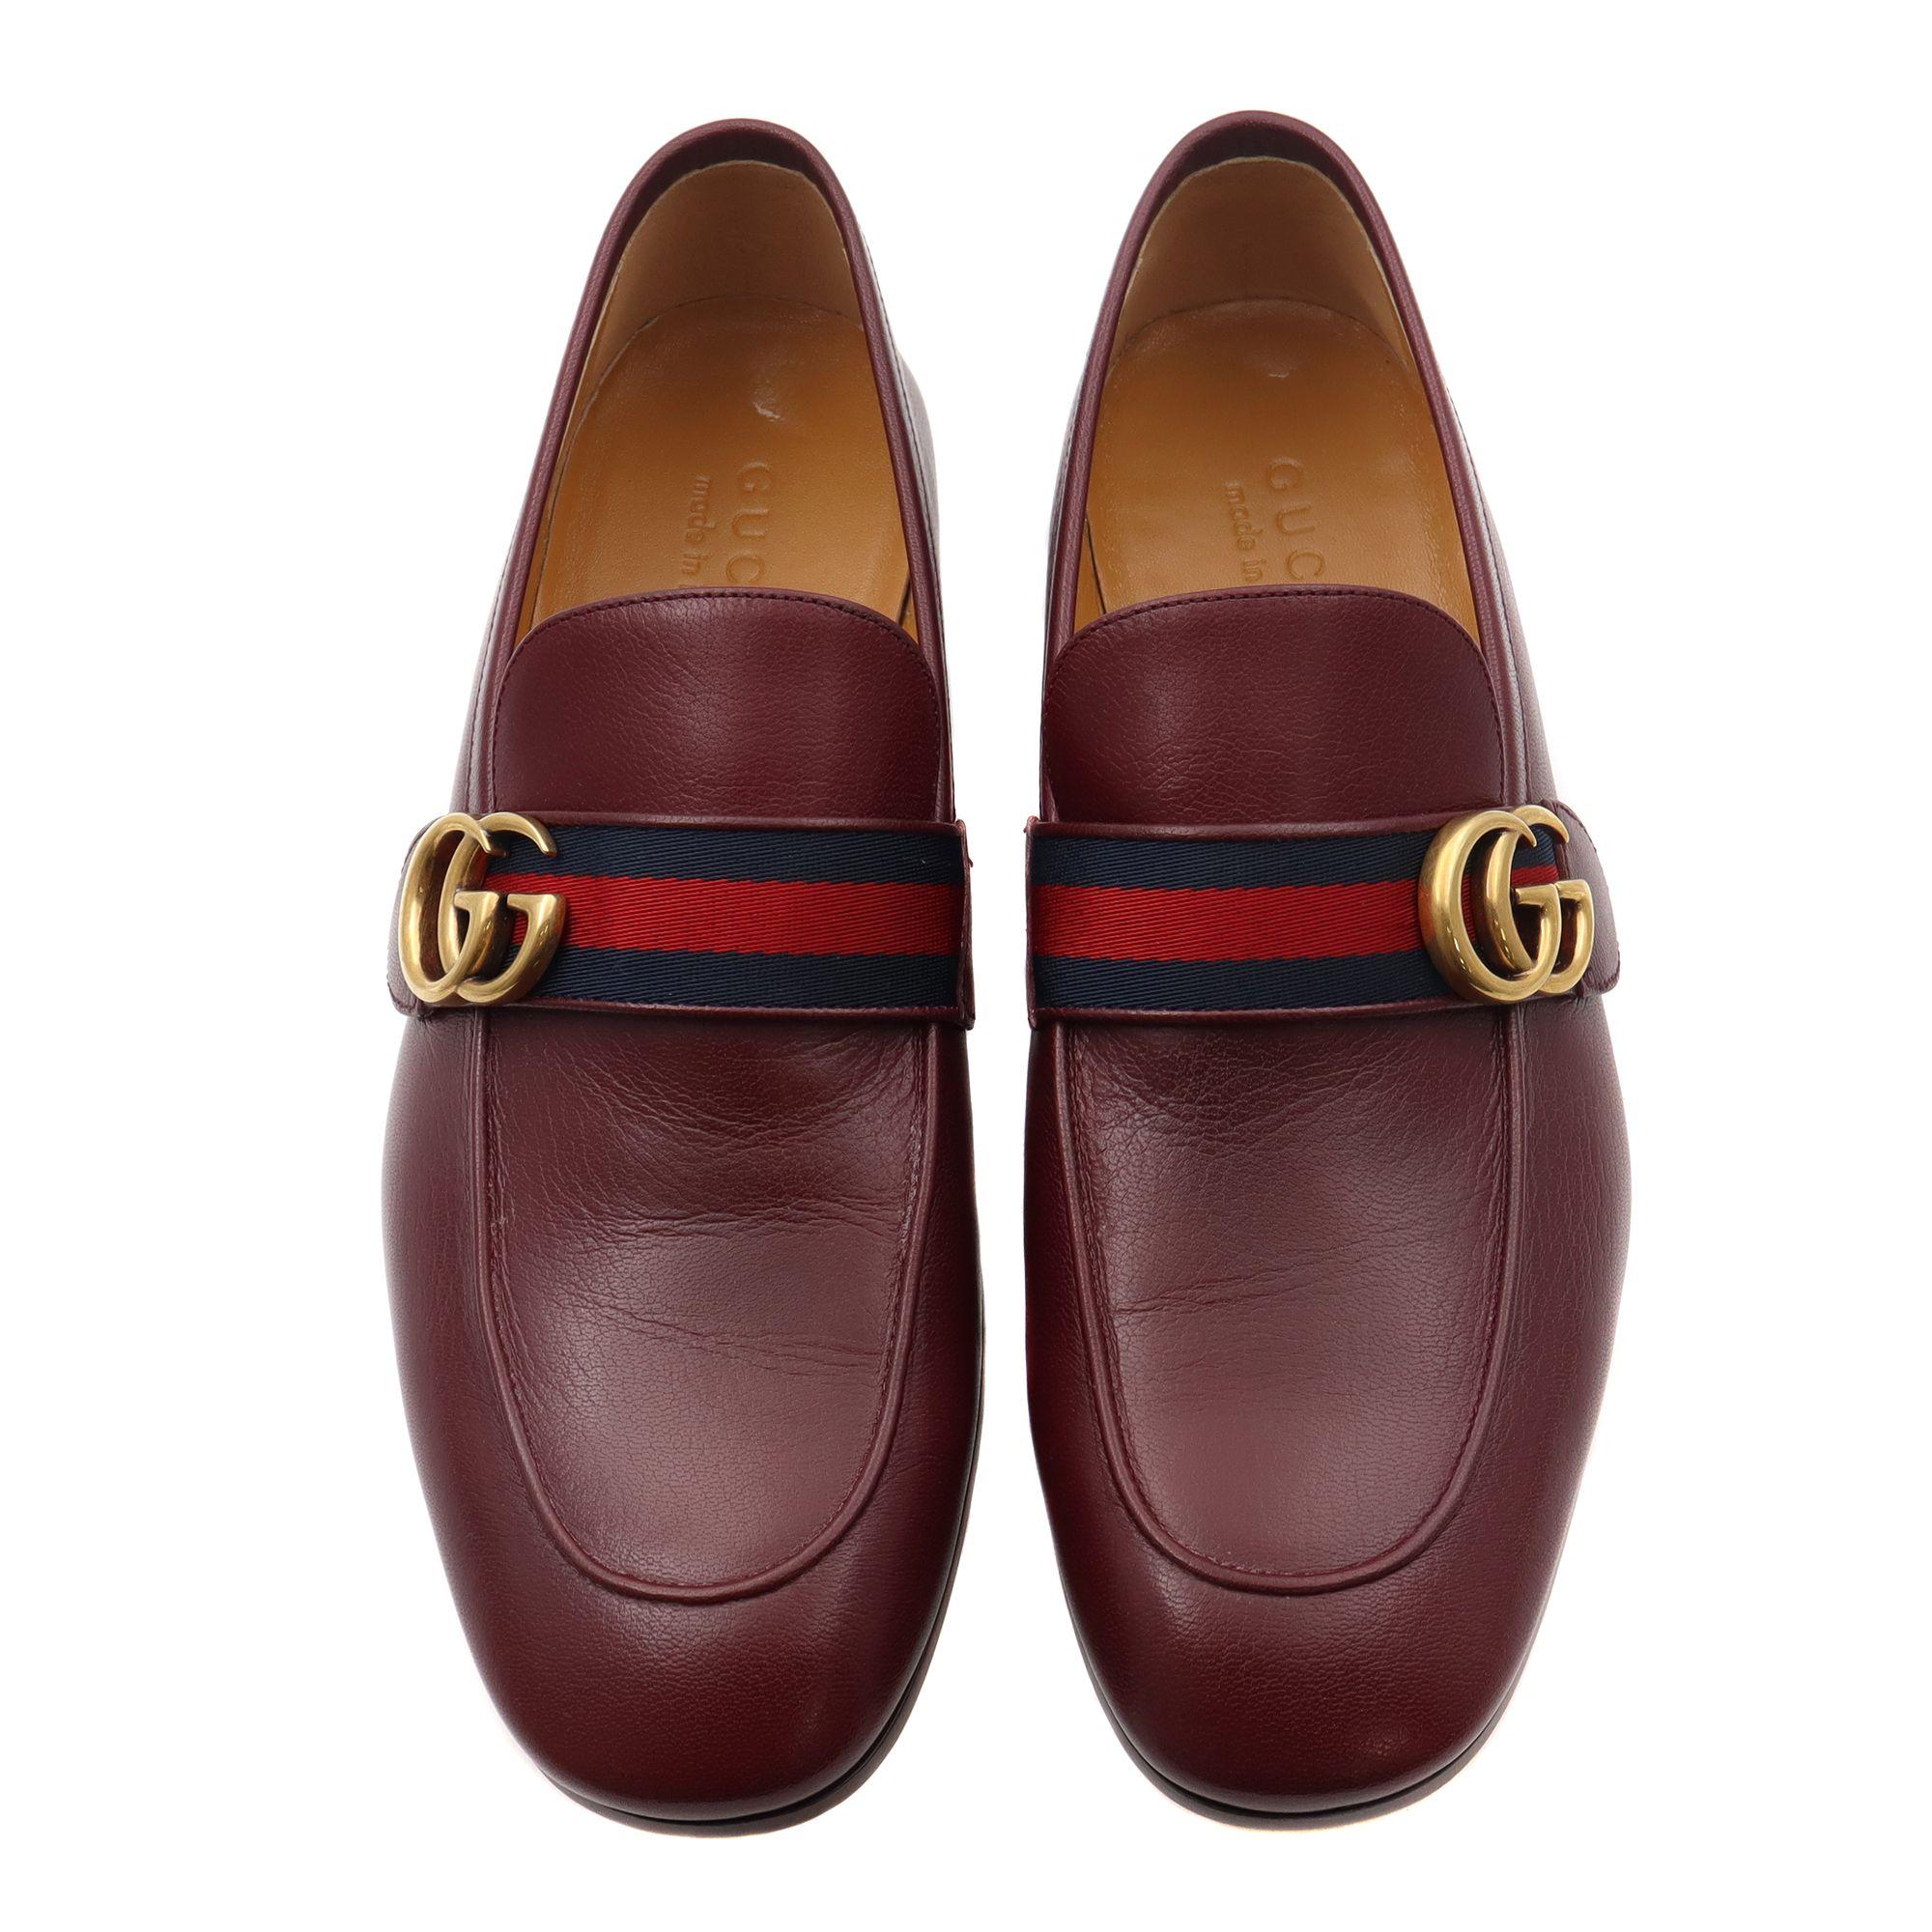 One of the most popular and iconic of the Gucci loafers in a burgundy color. New condition. Shoe box and Gucci shoe dust bags are included. Guaranteed to be 100% authentic. Men's Size 8.
Gucci 